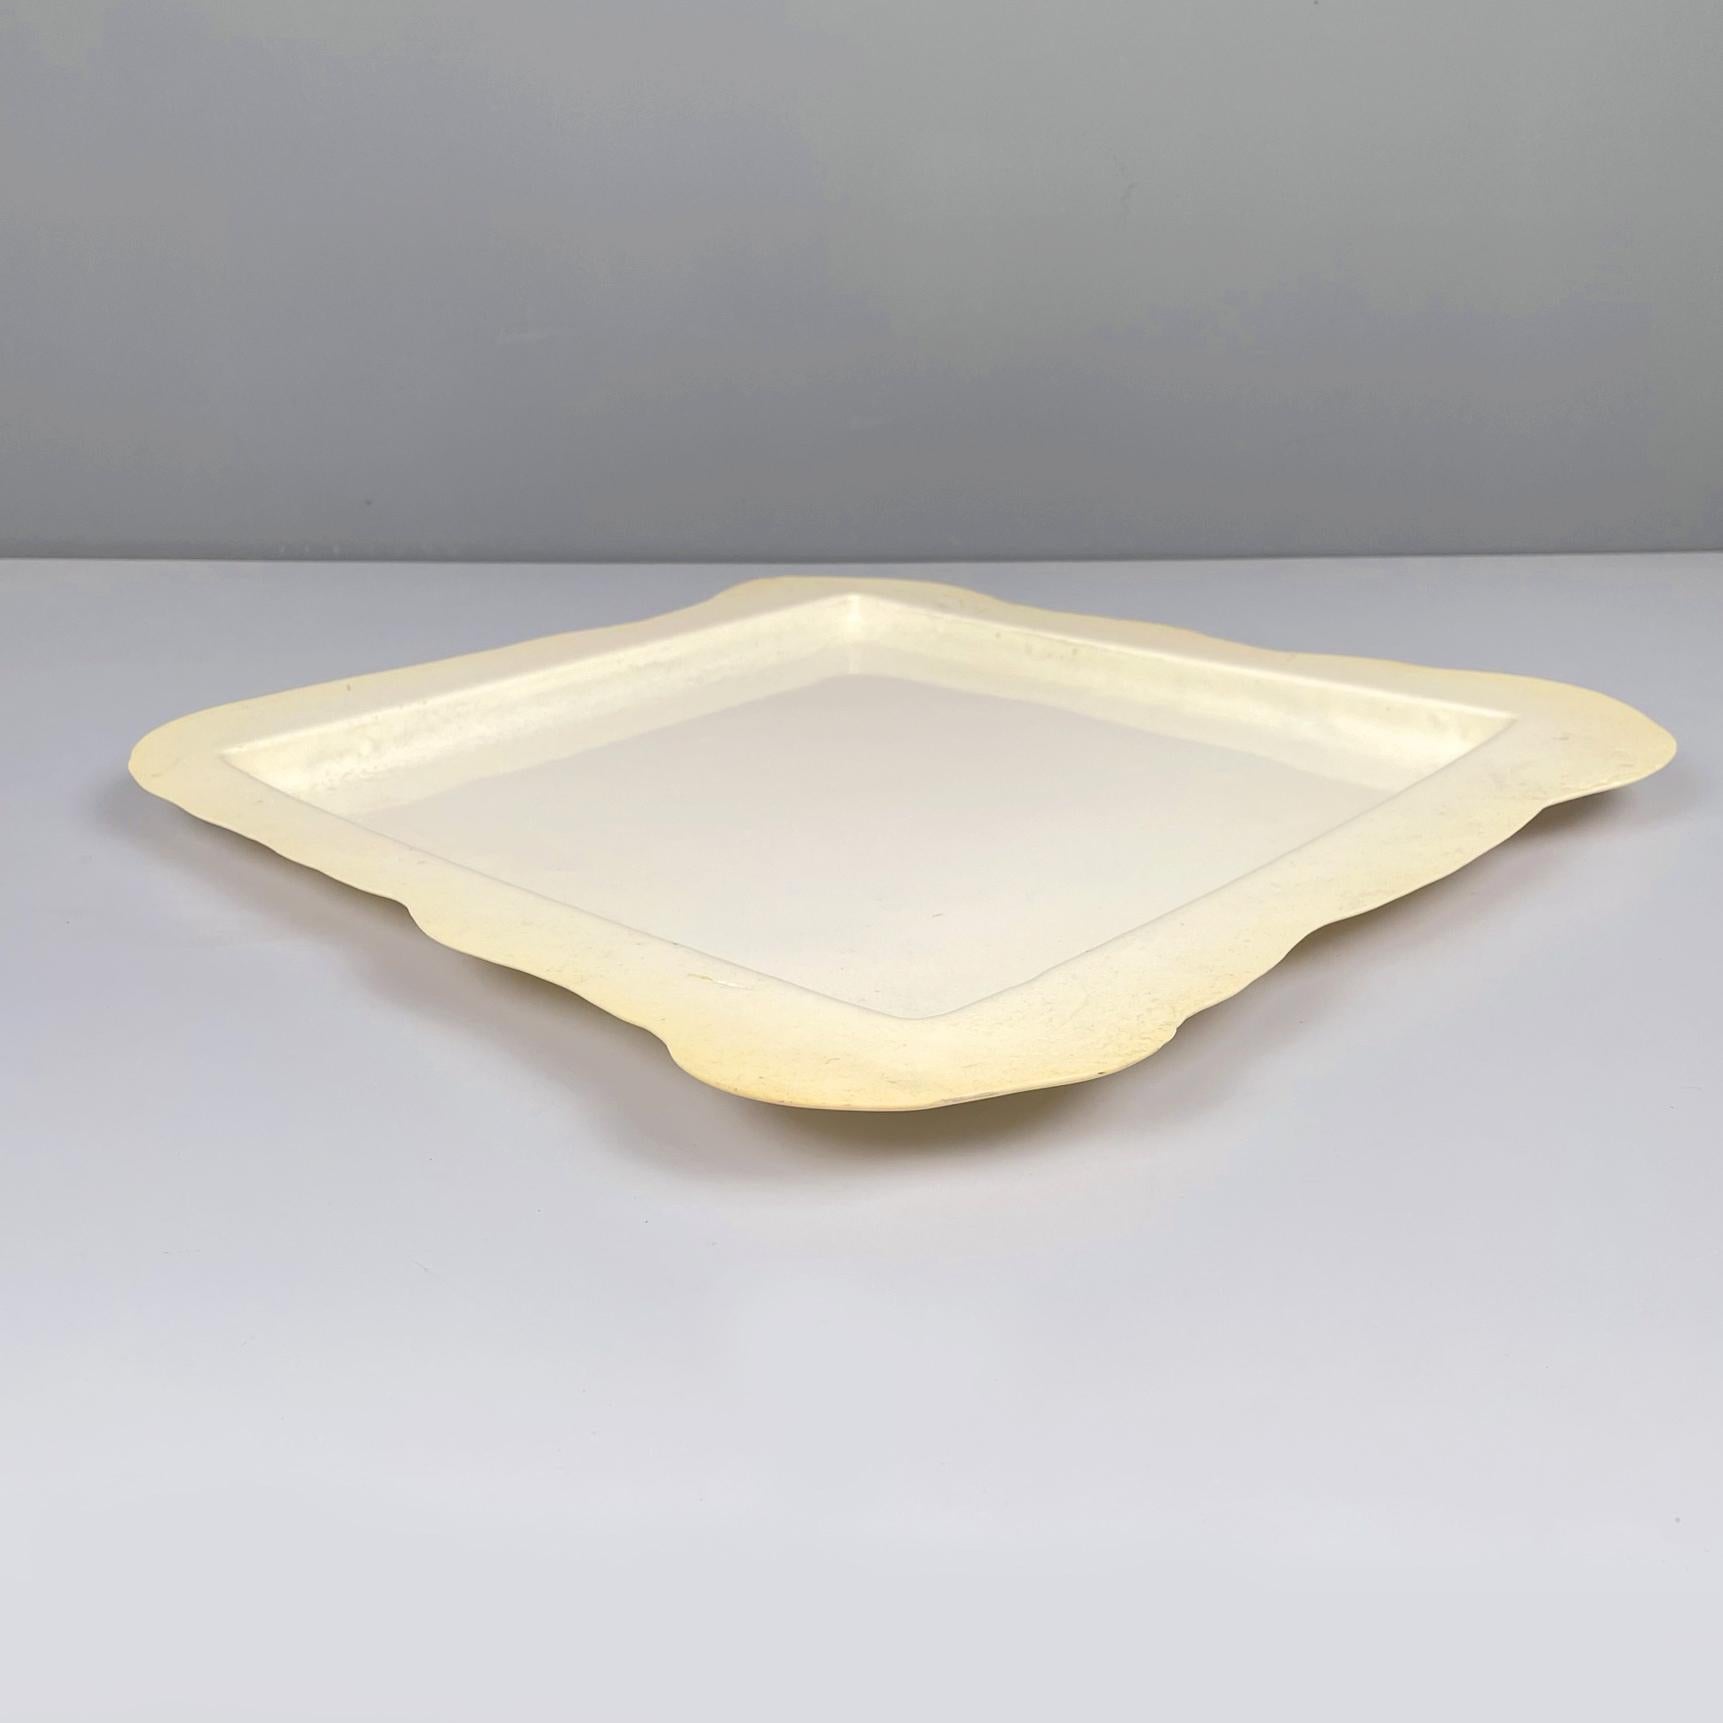 Italian post-modern White Resin tray by Gaetano Pesce for Fish Design, 2000s
Tray with square top in creamy white resin. The profile of the tray is irregular and asymmetrical.
Produced by Fish Design in 2000s and designed by Gaetano Pesce.
Very